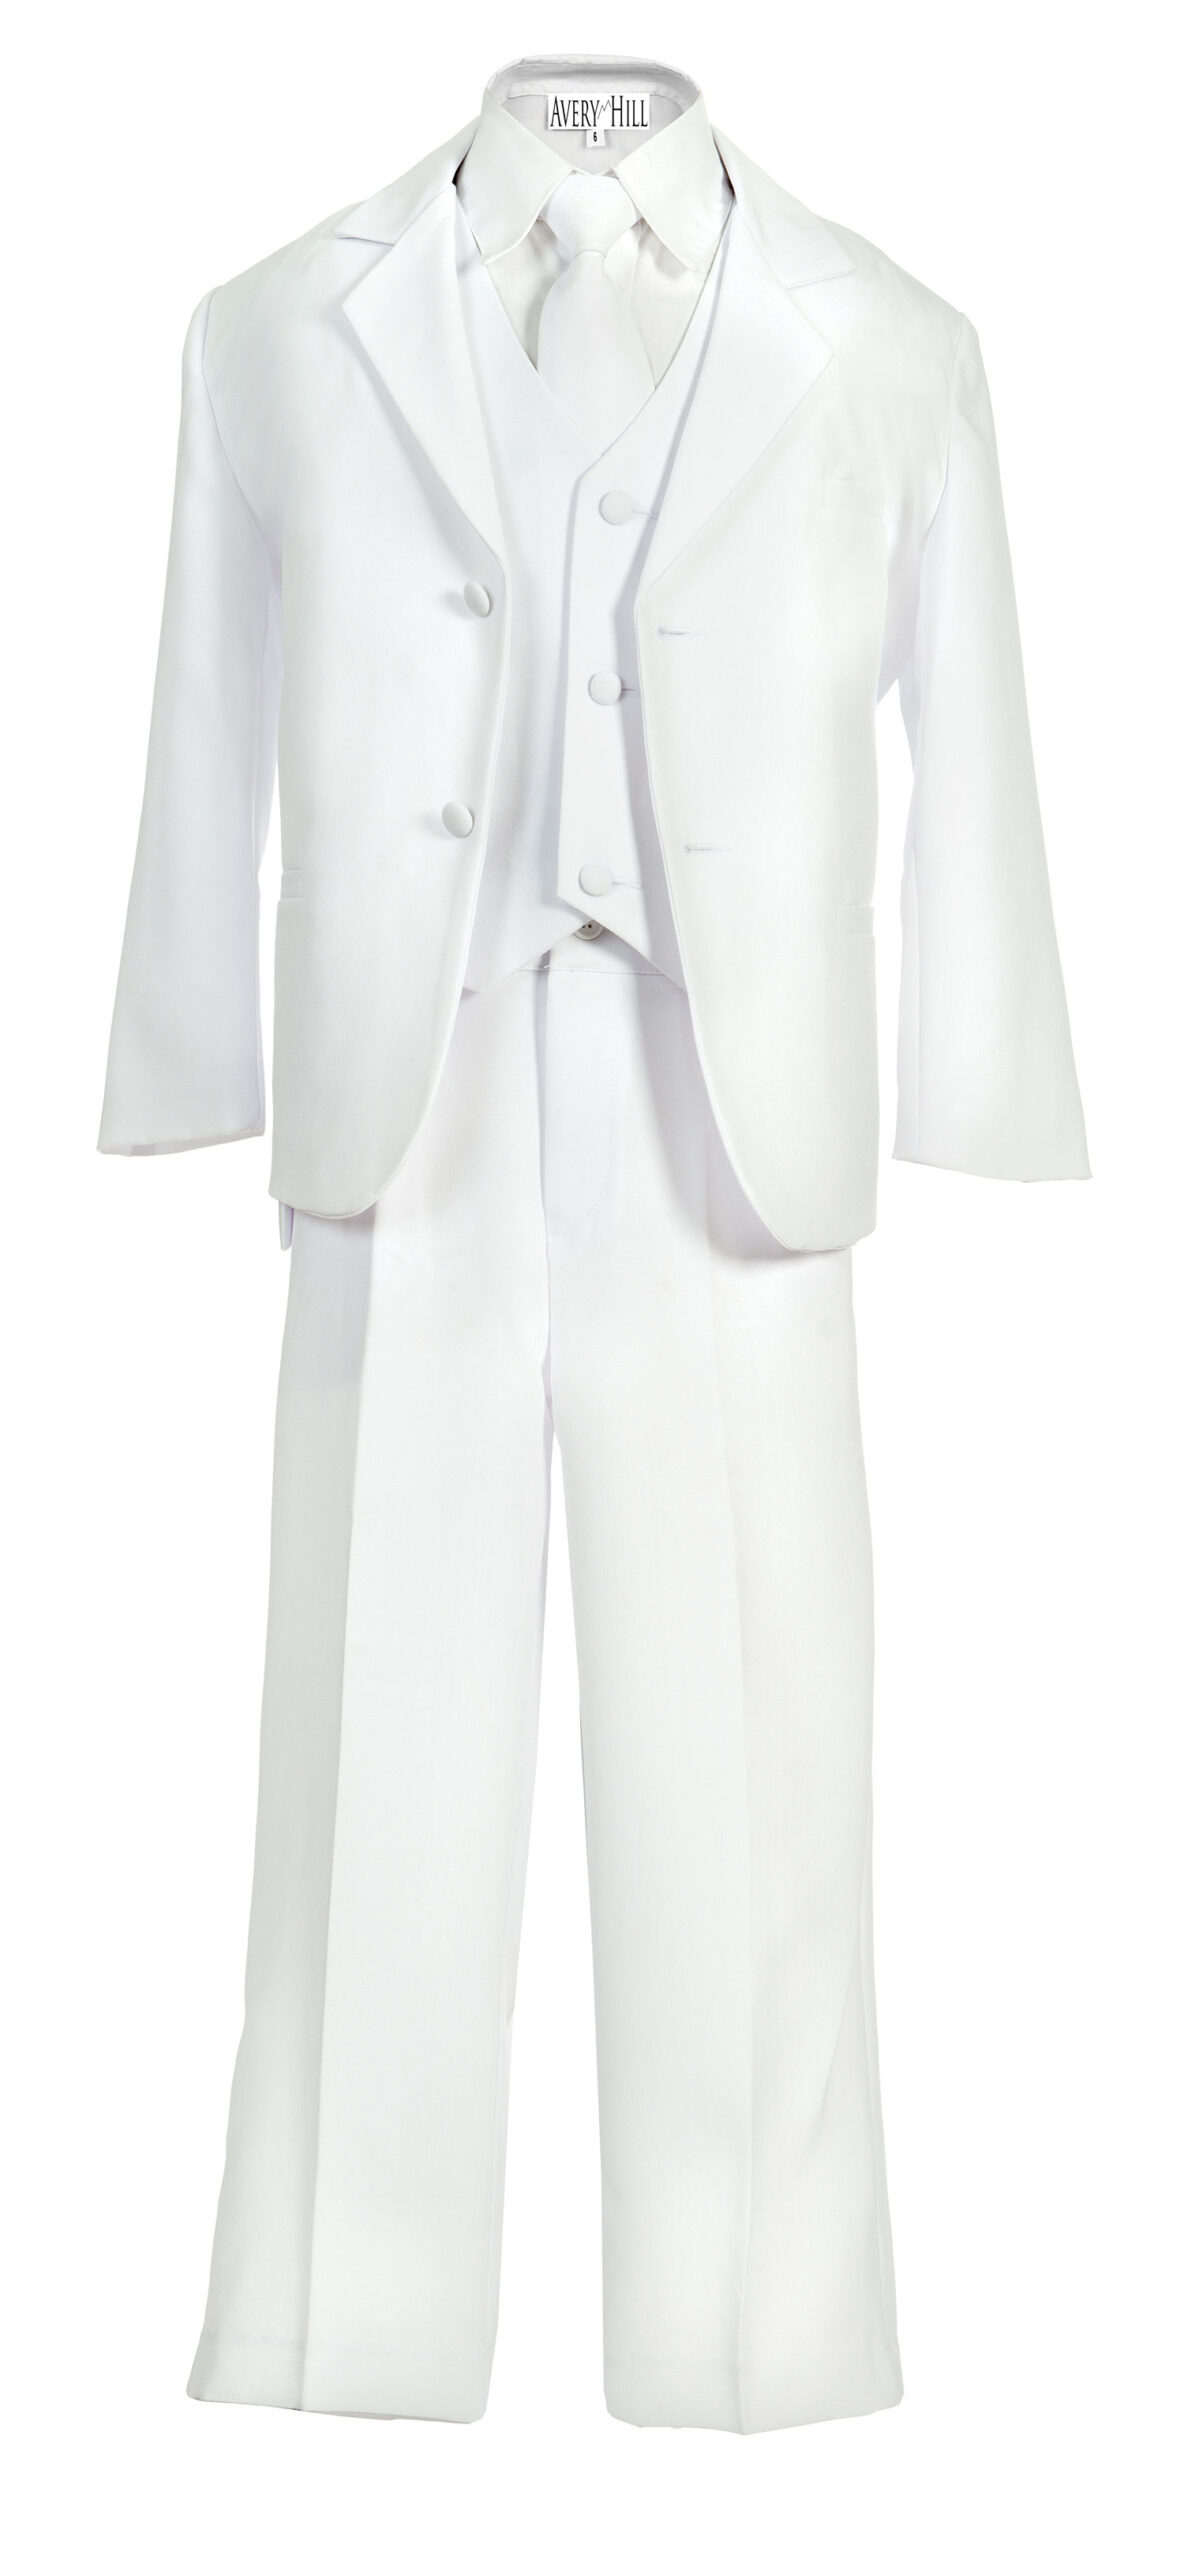 Avery Hill Boys Formal 5 Piece Suit with Shirt and Vest White - S